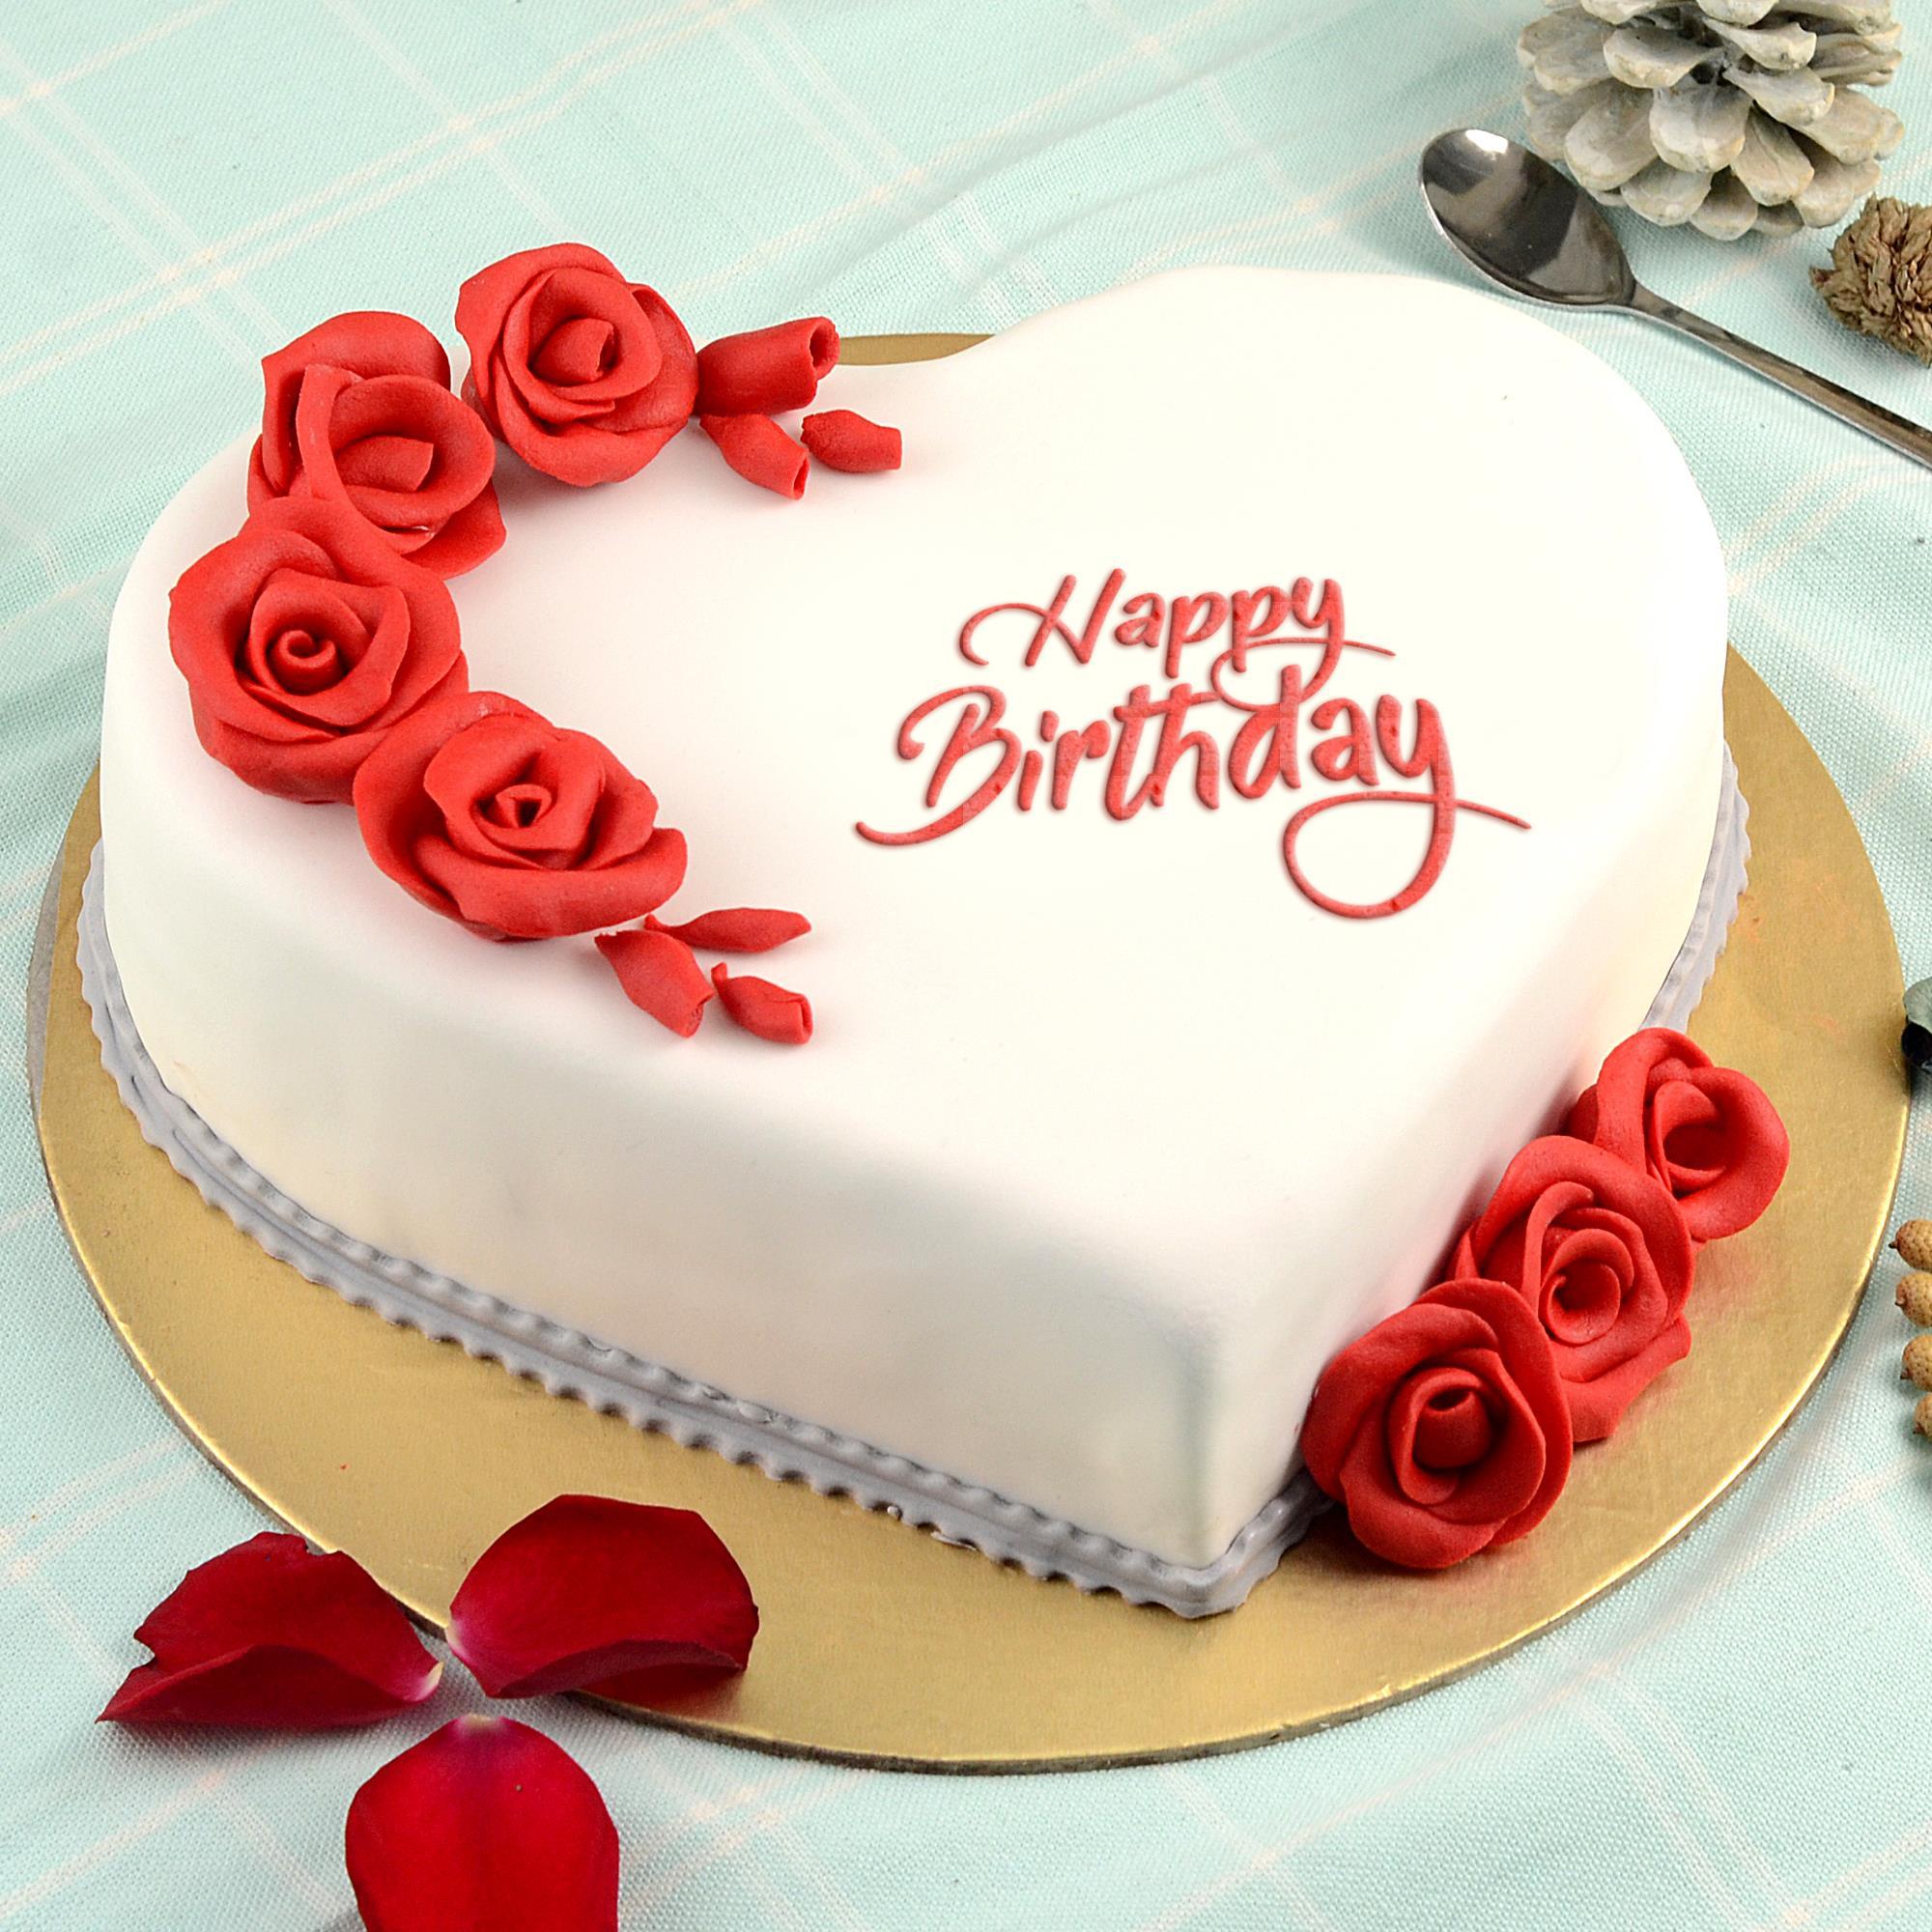 Best Cakes in Singapore: Same-Day Cake Delivery - Gifting Made Easy - Buy  Gift Cards, Experience Gifts, Flowers, Hampers Online in Singapore - Giftano